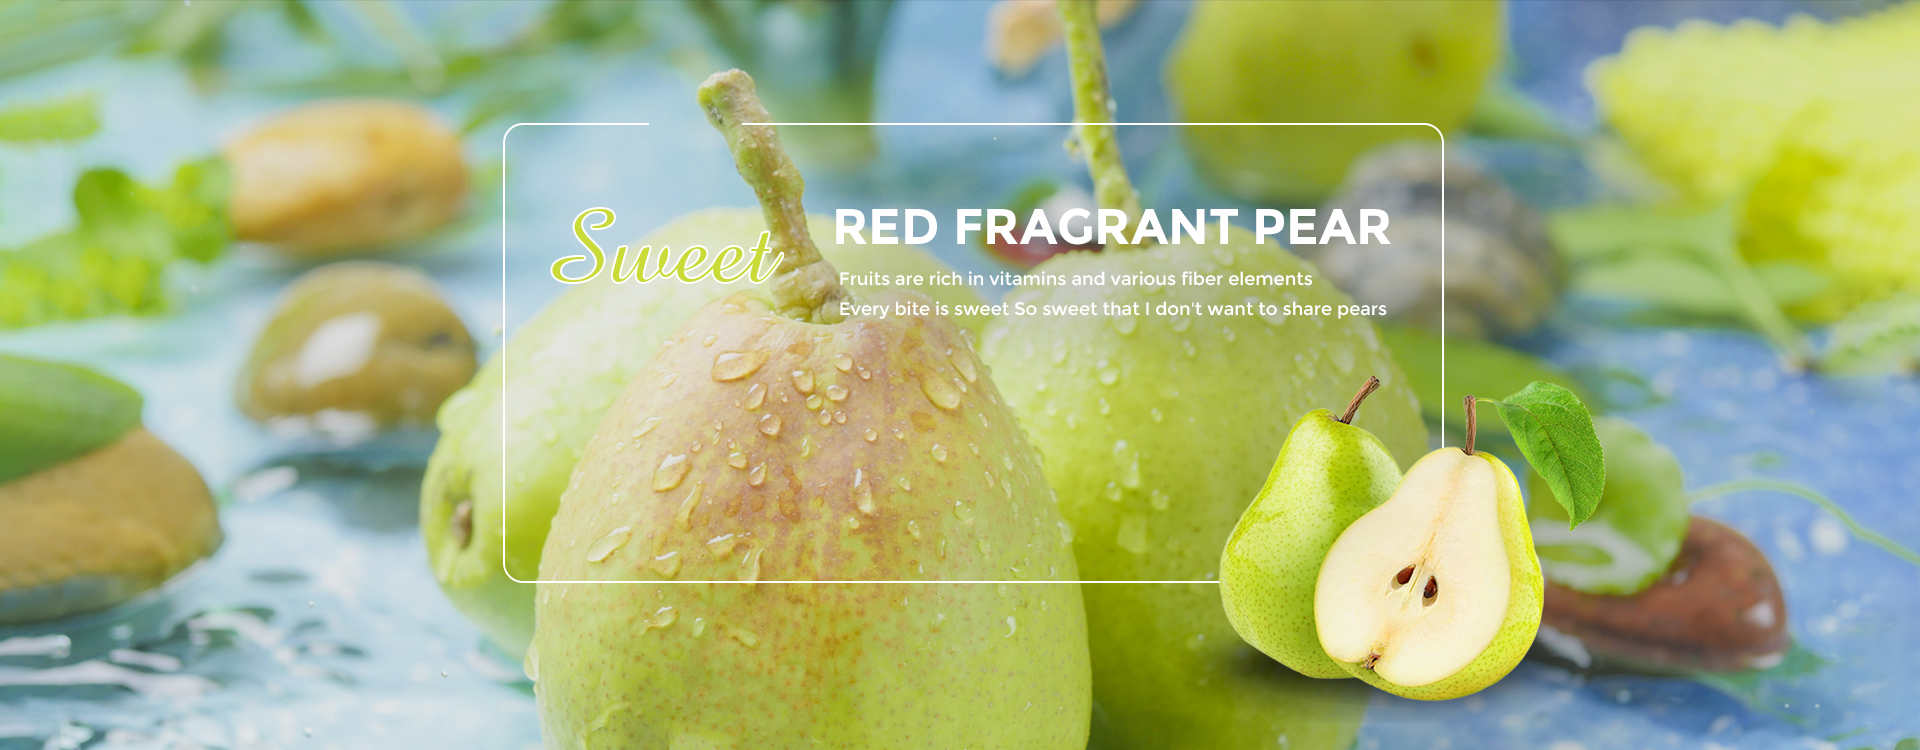 Red Fragrant Pear